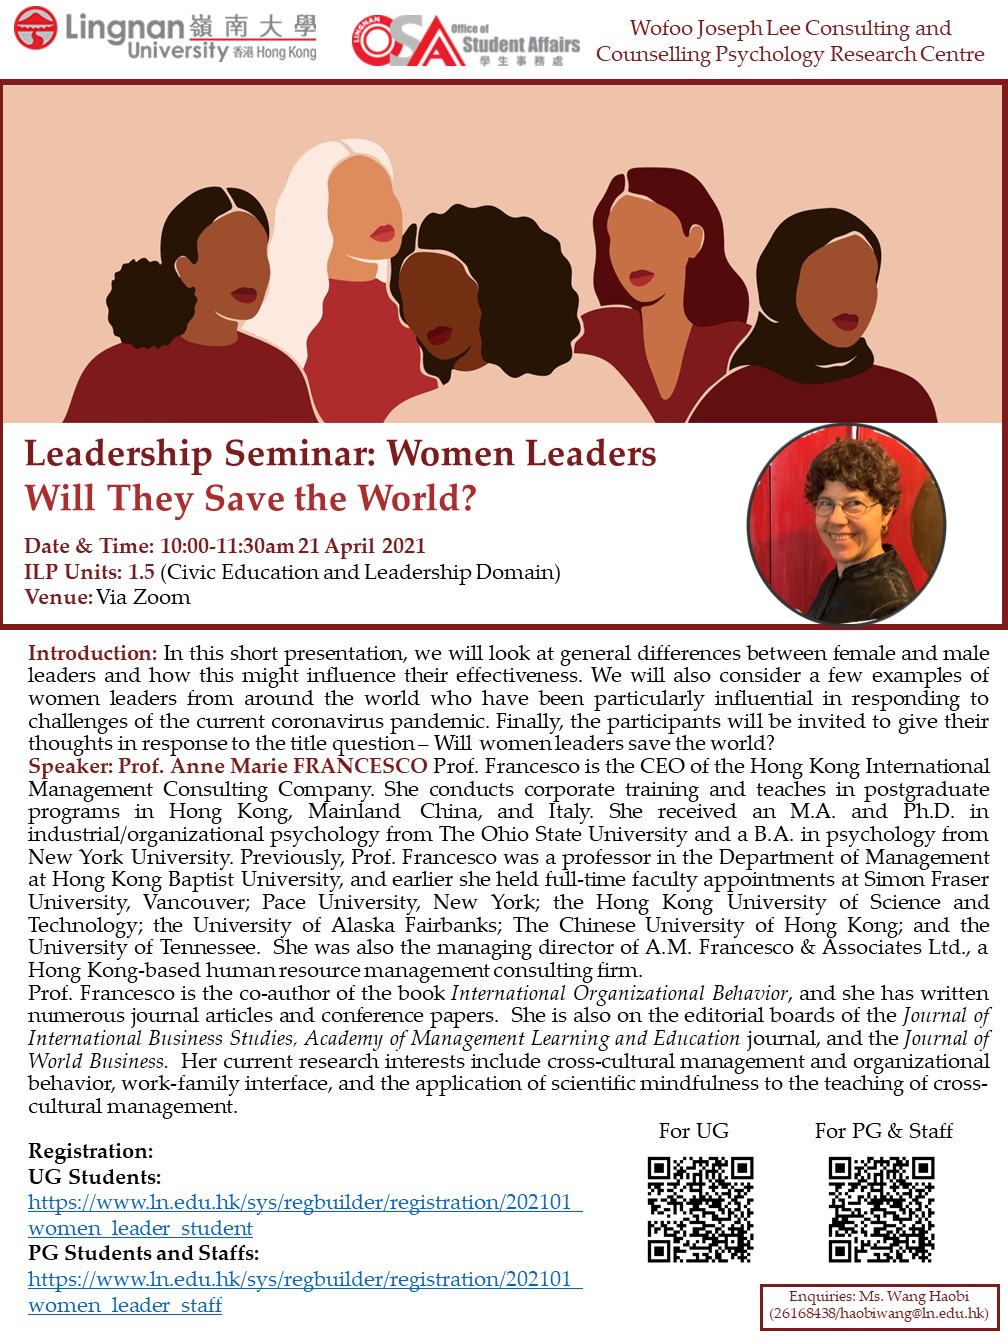 [Leadership Seminar] Women Leaders Will They Save the World?